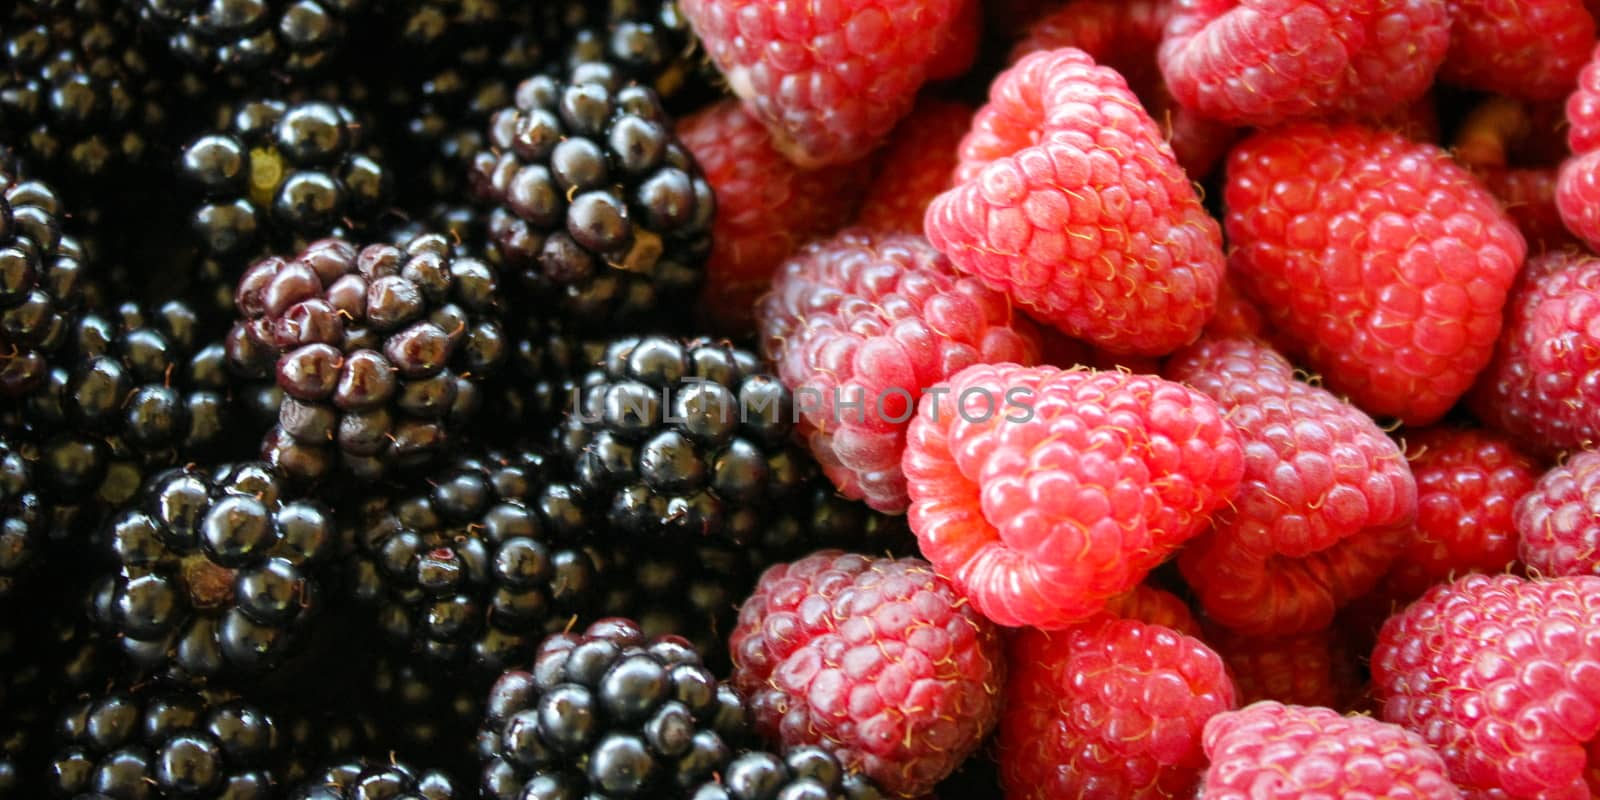 Banner of blackberries and raspberries. On the left side blackberries and on the right side raspberries. by mahirrov